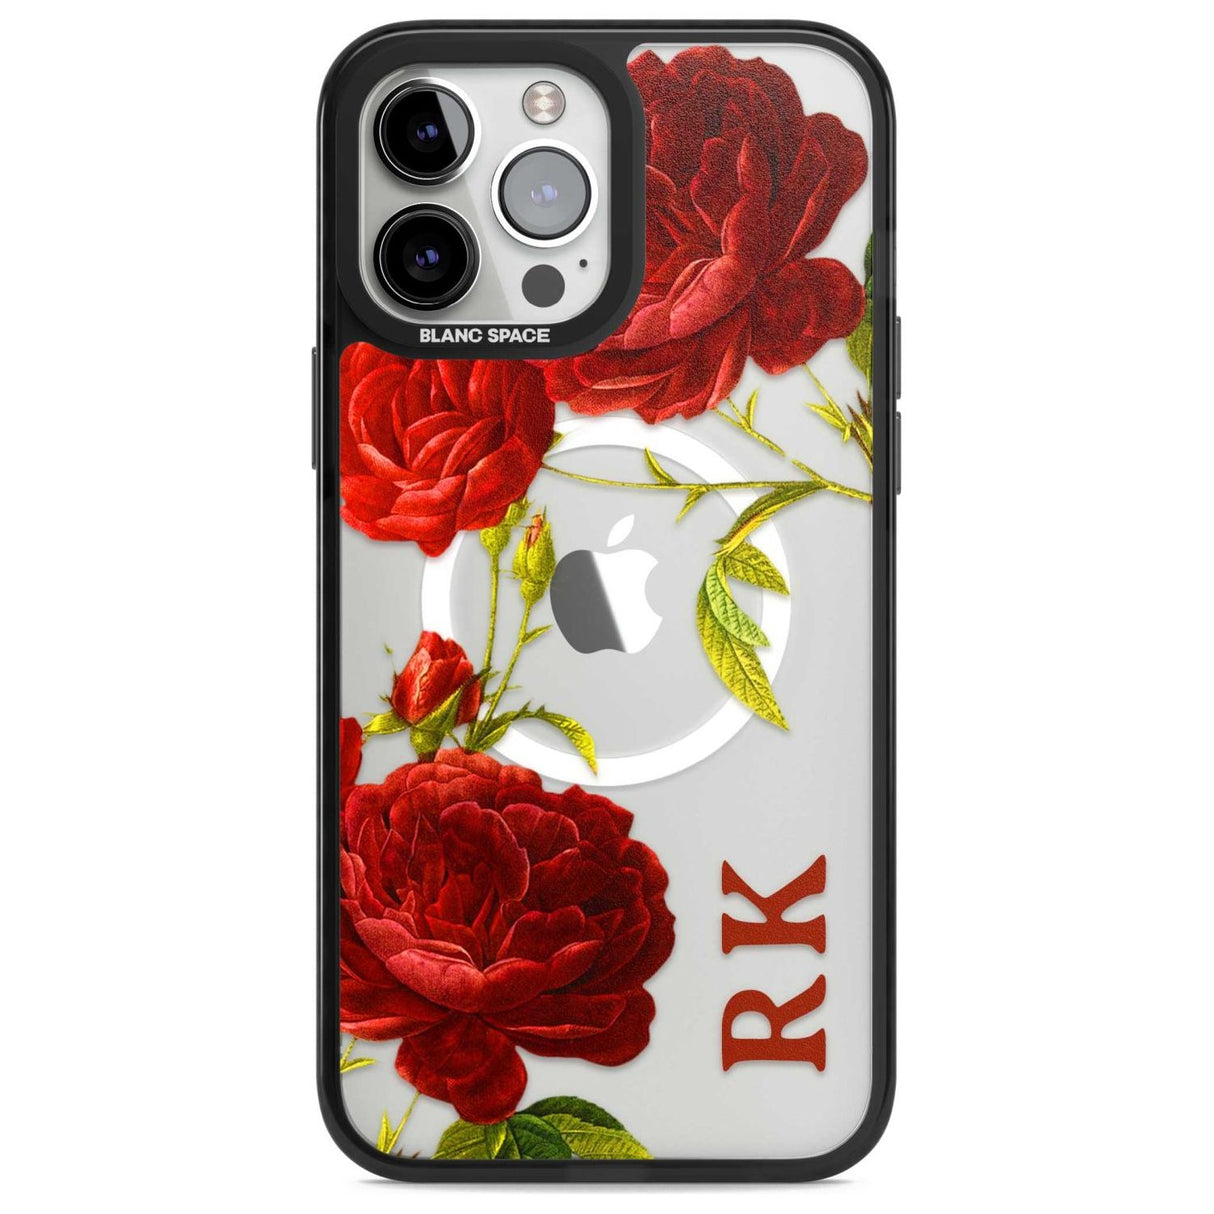 Personalised Clear Vintage Floral Red Roses Custom Phone Case iPhone 13 Pro Max / Magsafe Black Impact Case Blanc Space